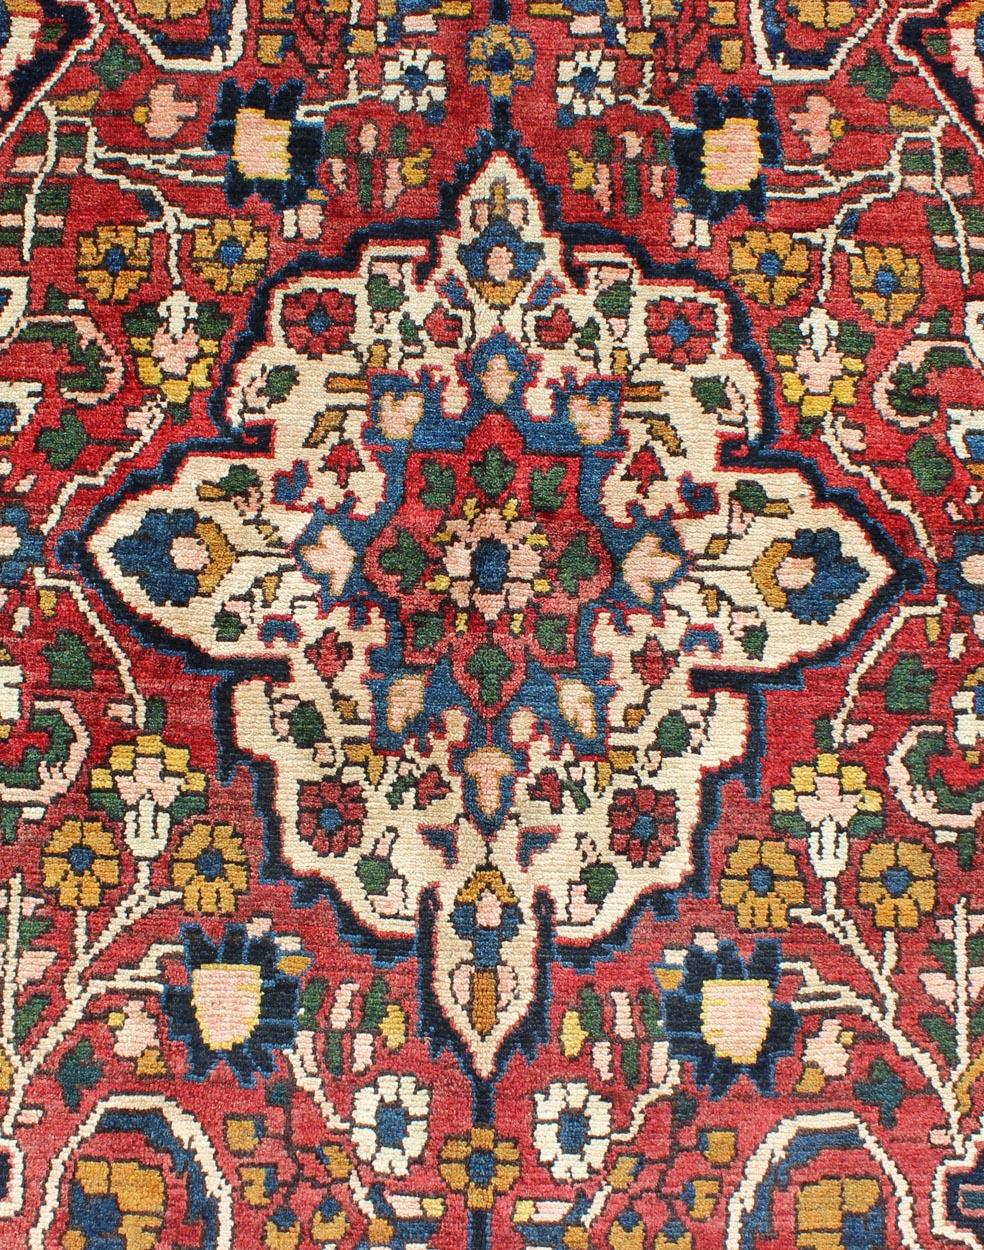 Wool Vintage Persian Bakhtiari Rug with Floral Medallion Design in Red